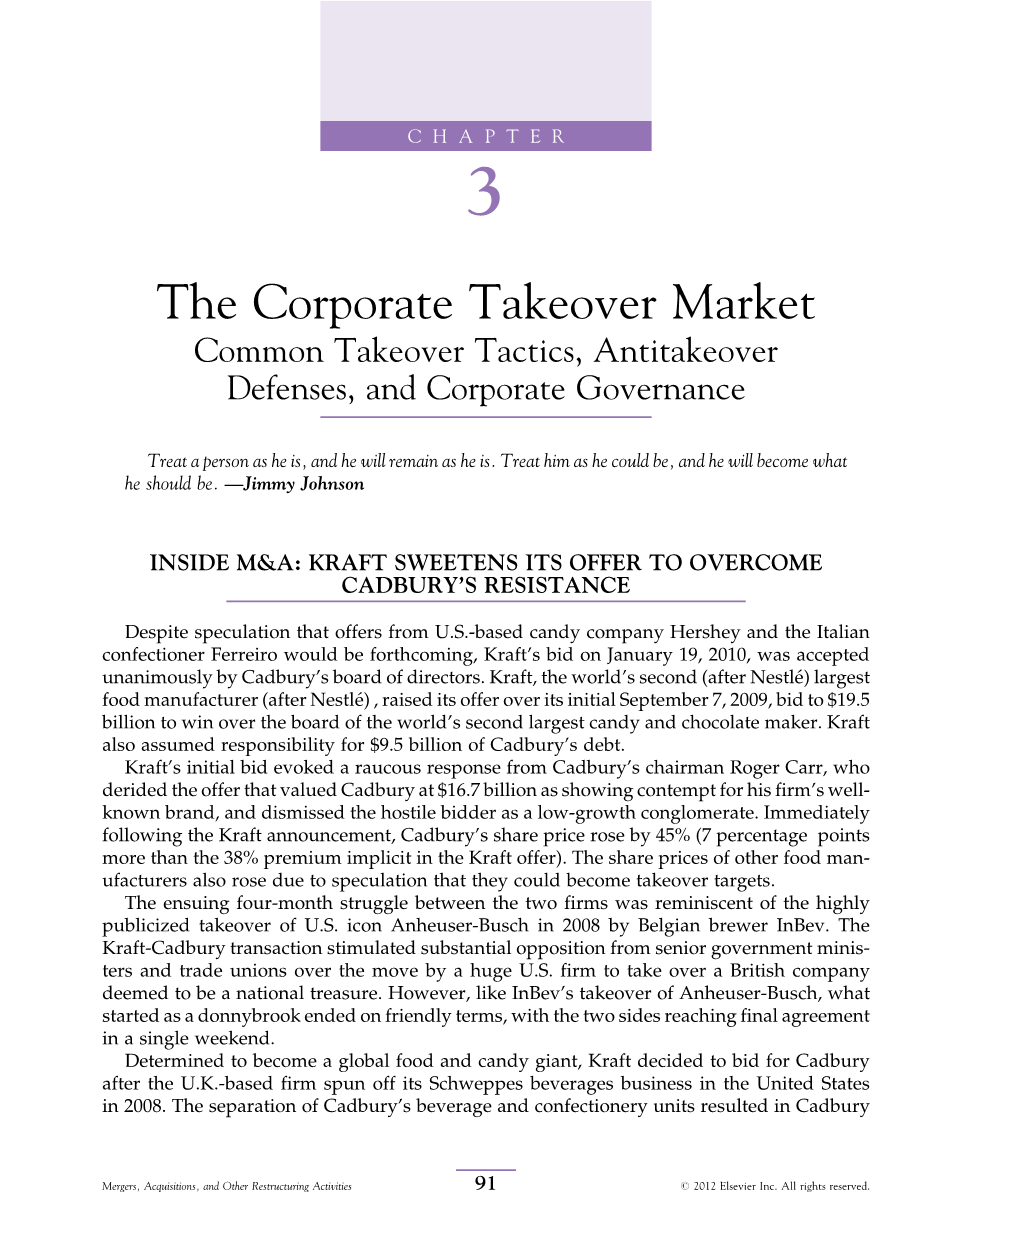 The Corporate Takeover Market Common Takeover Tactics, Antitakeover Defenses, and Corporate Governance